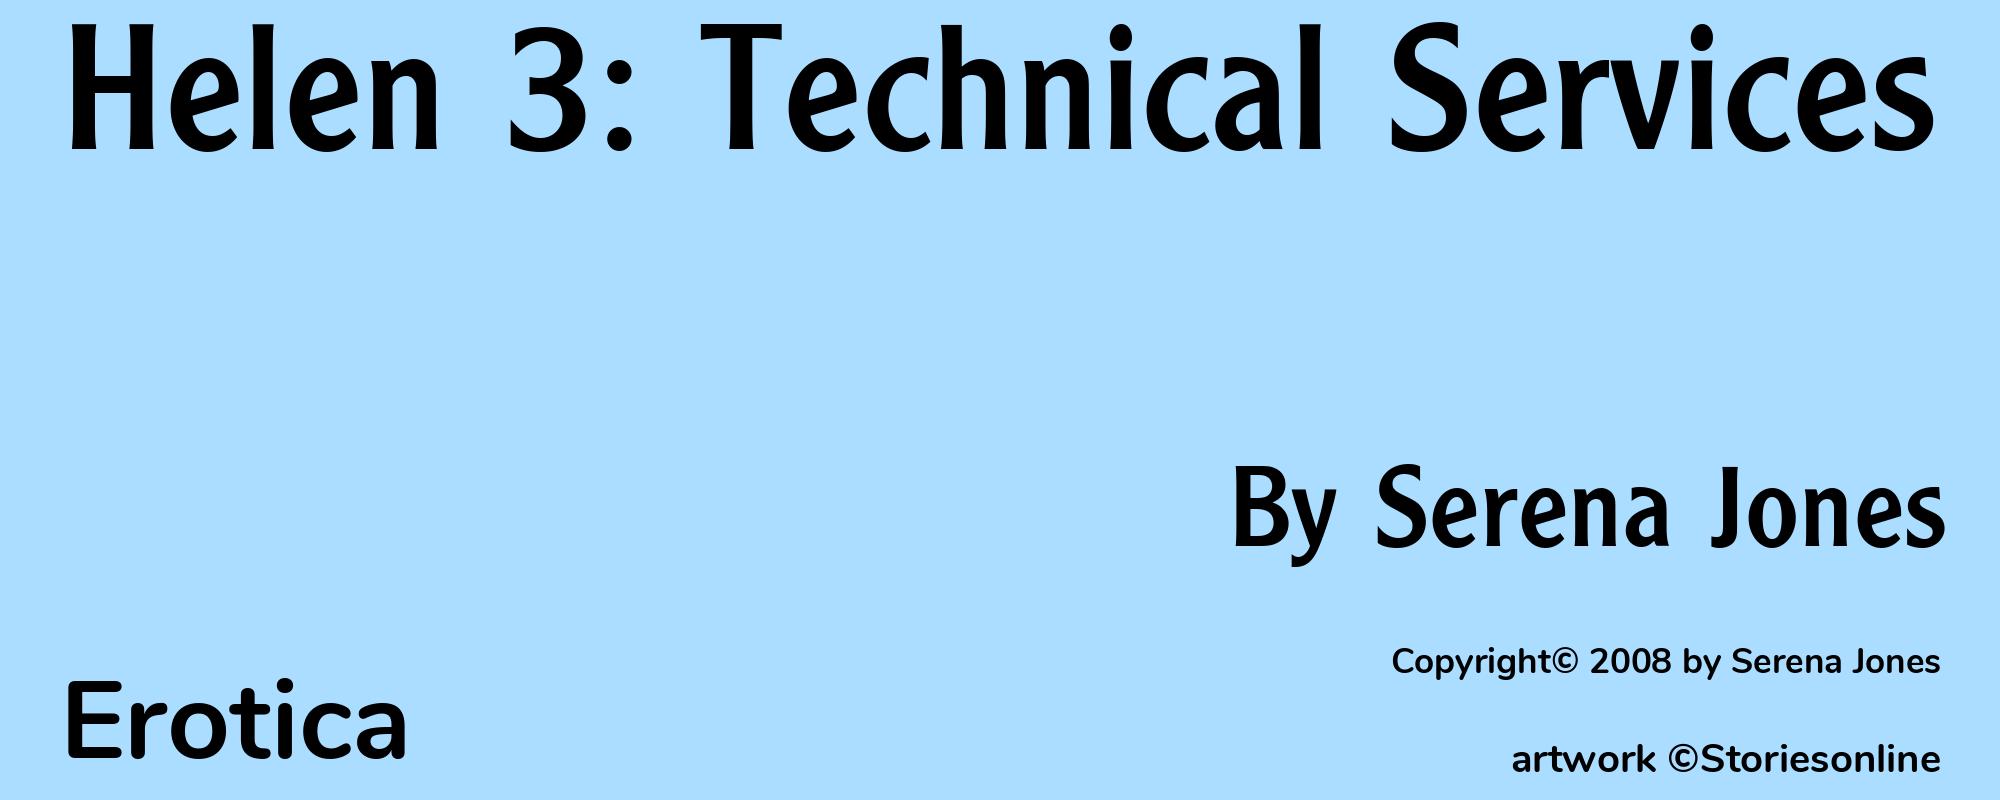 Helen 3: Technical Services - Cover